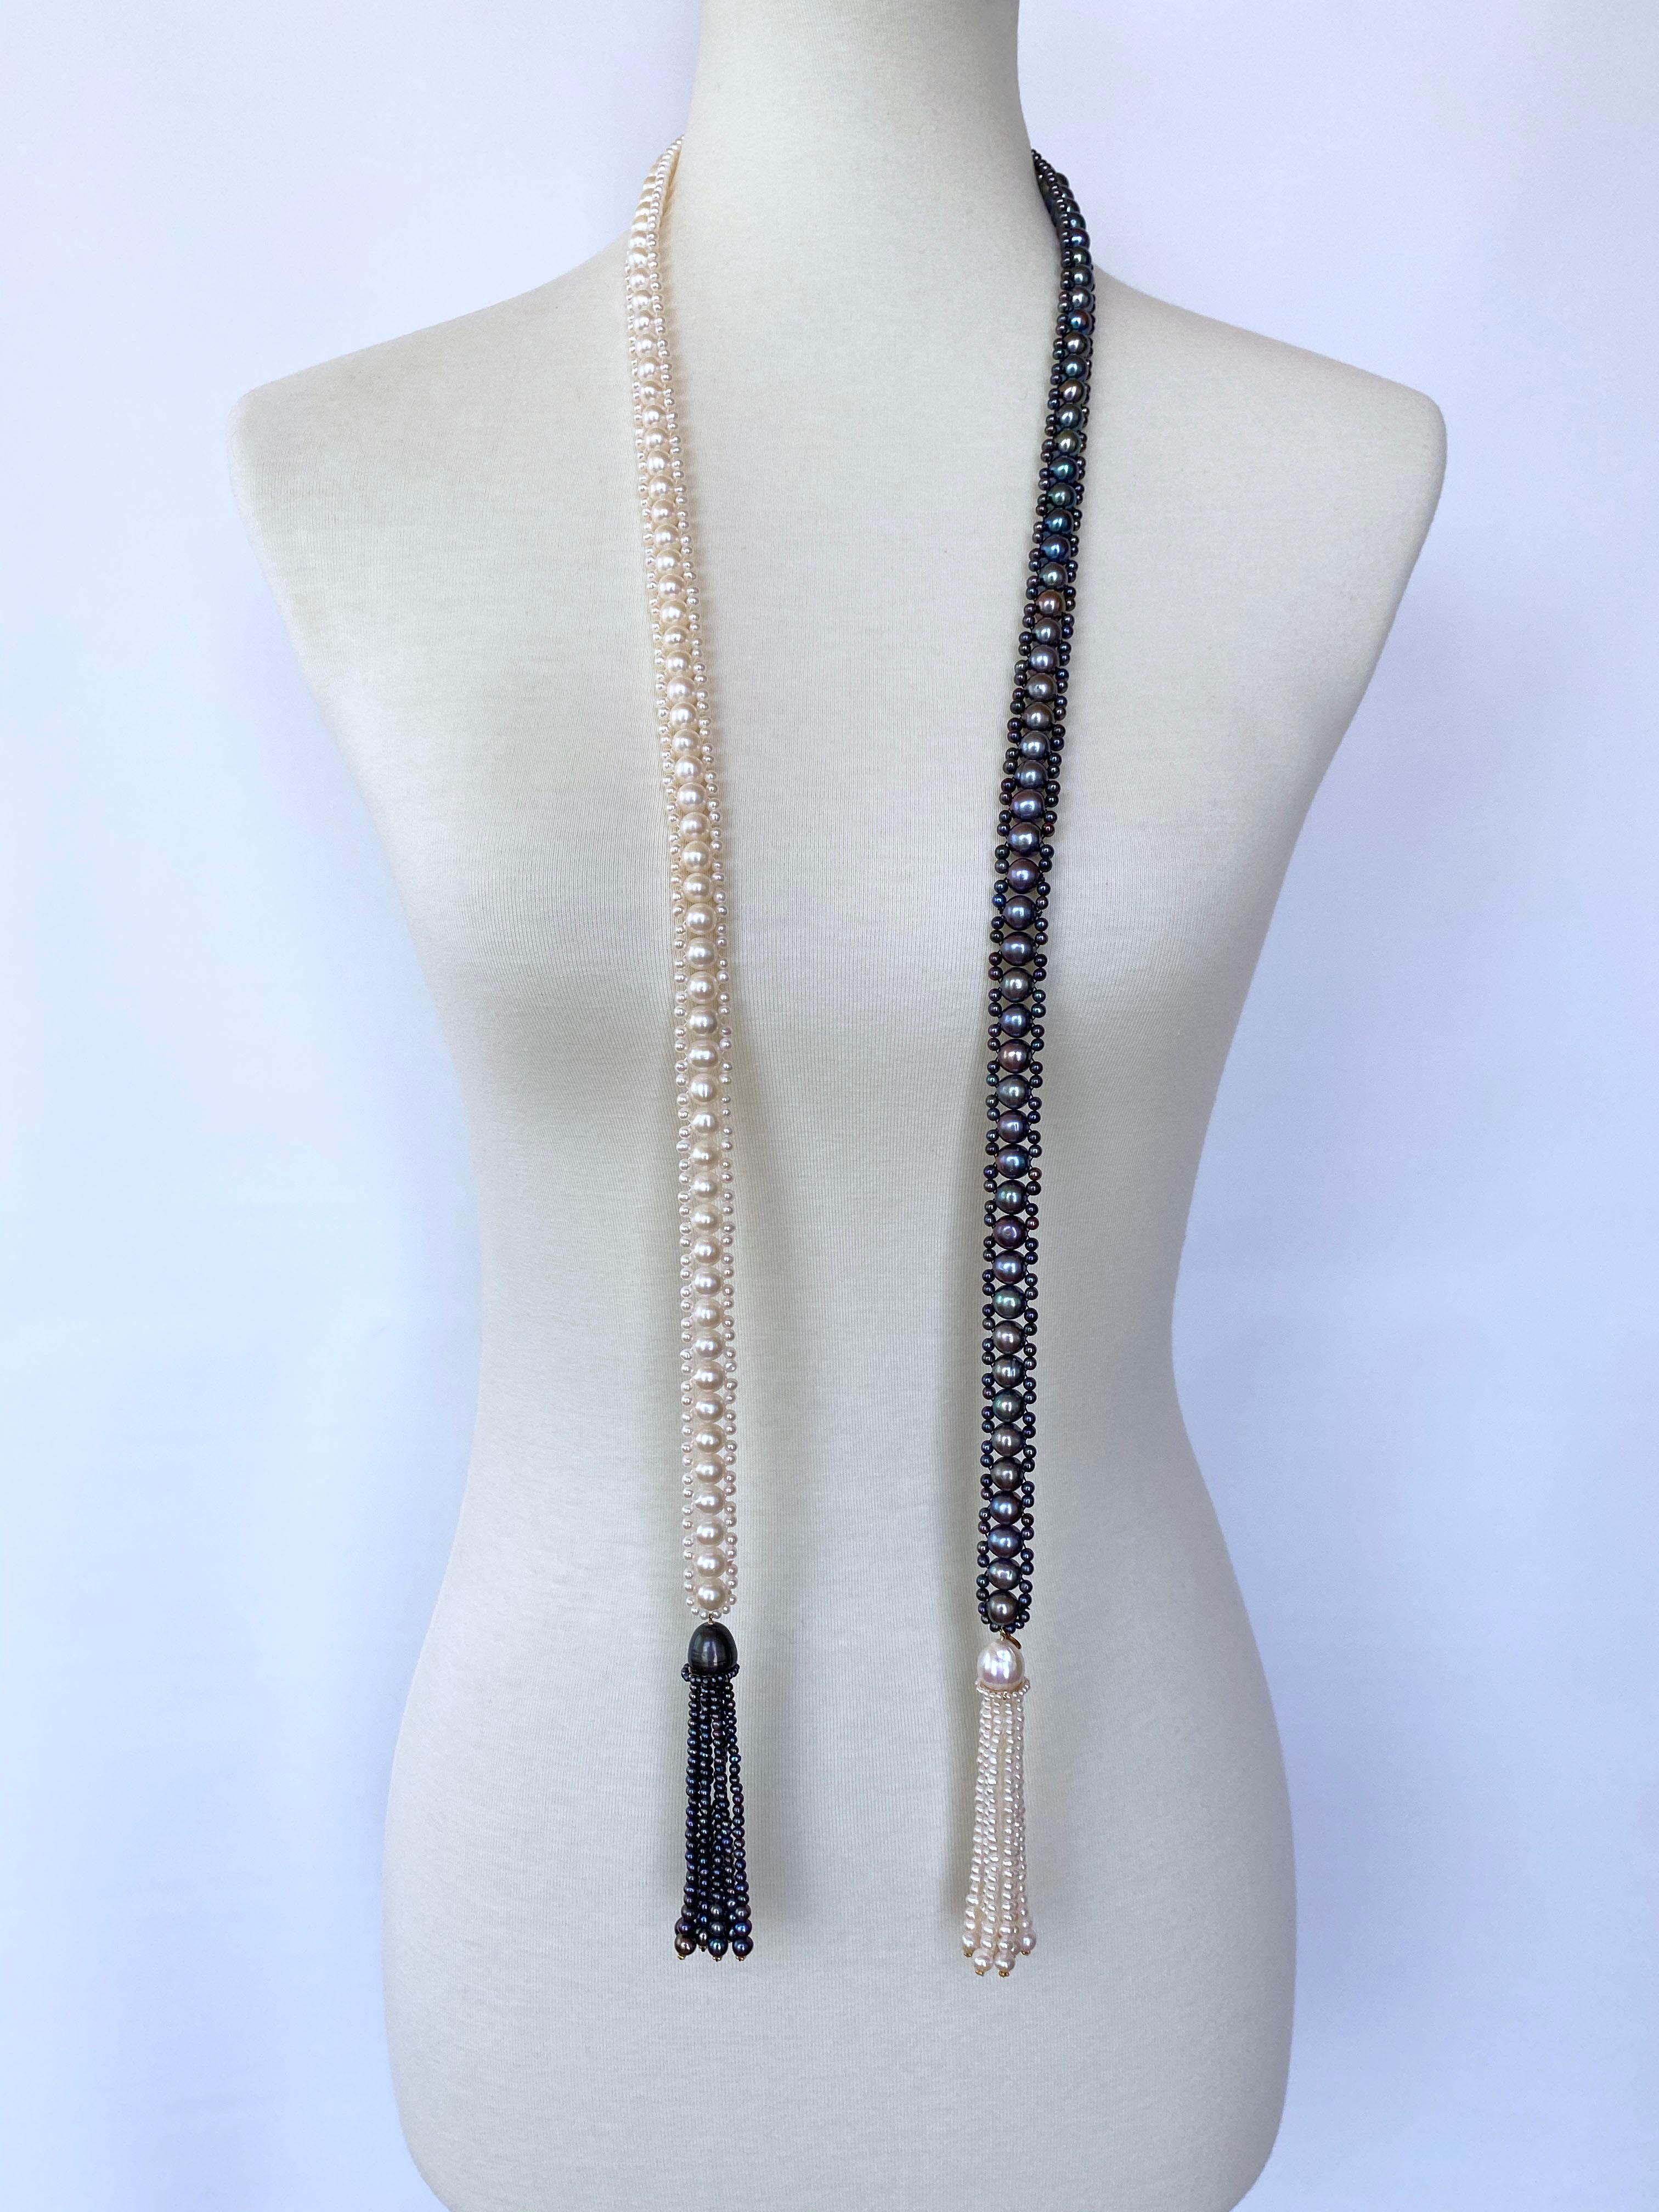 Gorgeous one of a kind Art Deco inspired two tone Sautoir Necklace hand woven by Marina J. This lovely piece is made using all Cultured Black and White Pearls (measuirng 3mm and 8mm) which all display an amazing iridescent sheen and 'oil spill'